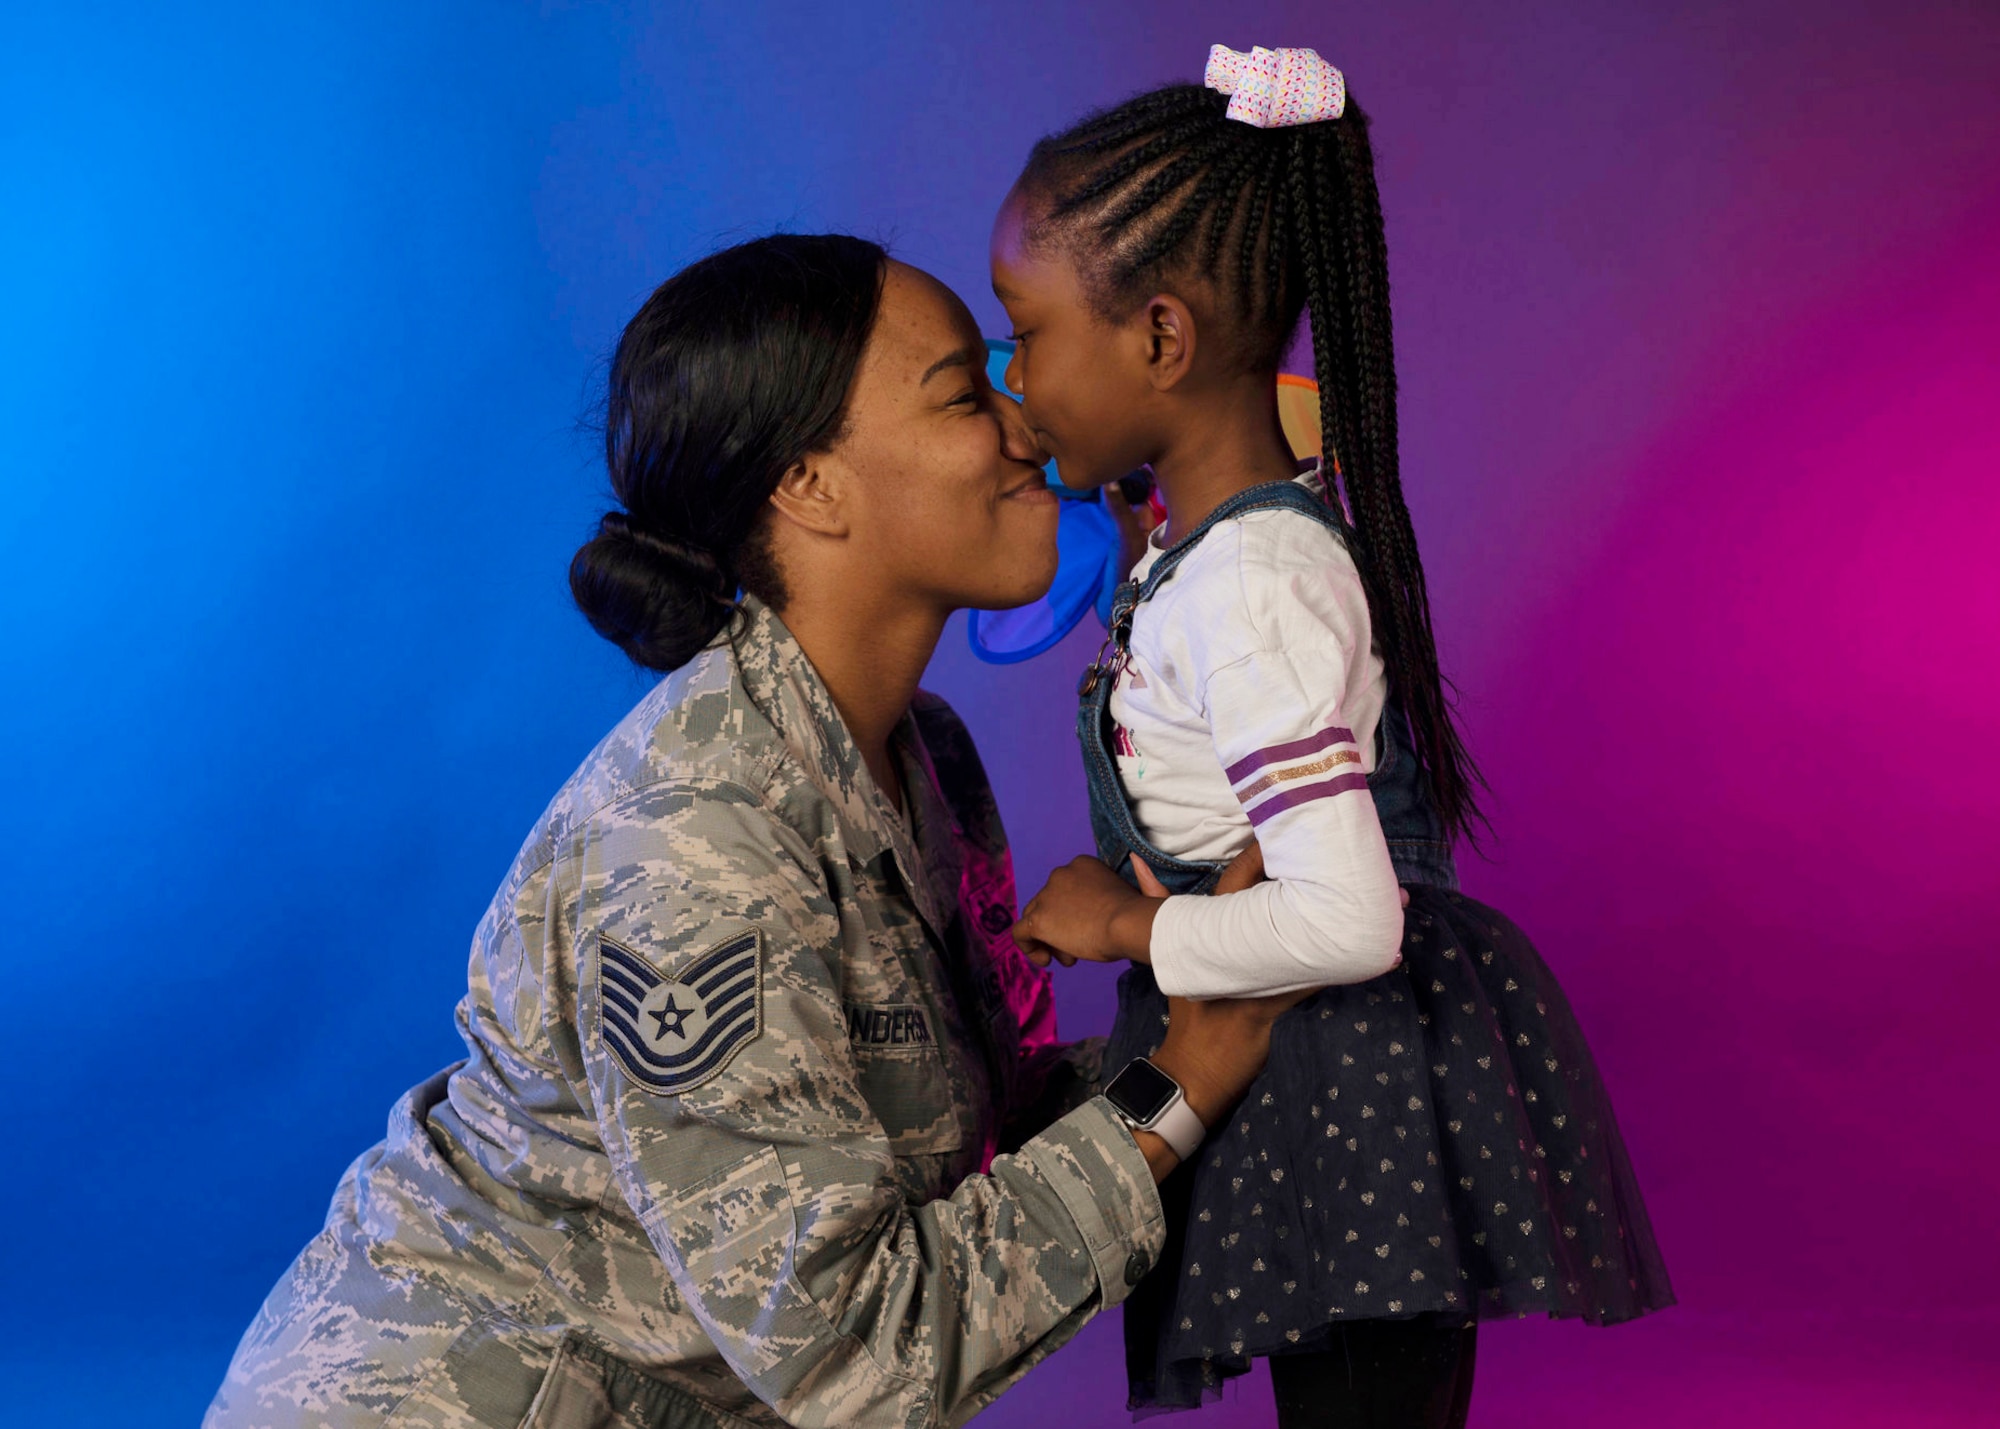 Every April, the Department of Defense celebrates Month of the Military Child. The Month of the Military Child. Established in 1986 by former Defense Secretary Caspar Weinberger, the Month of the Military Child is celebrated to recognize the 1.7 million total-force military children in the Department of Defense worldwide.